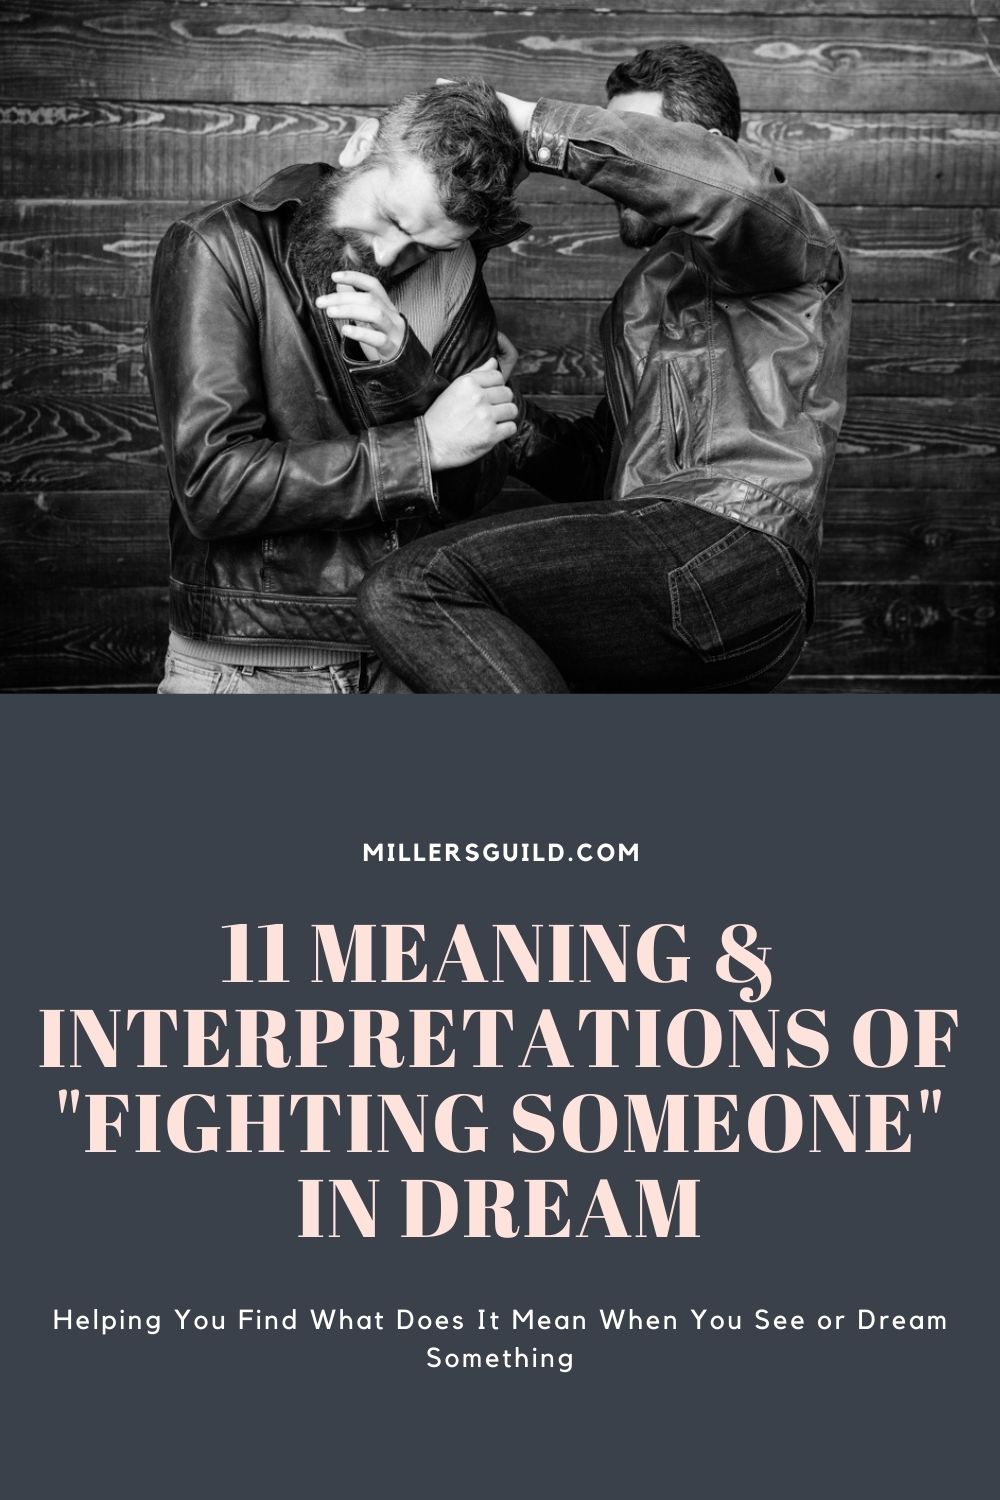 11 Meaning & Interpretations of Fighting Someone In Dream 2